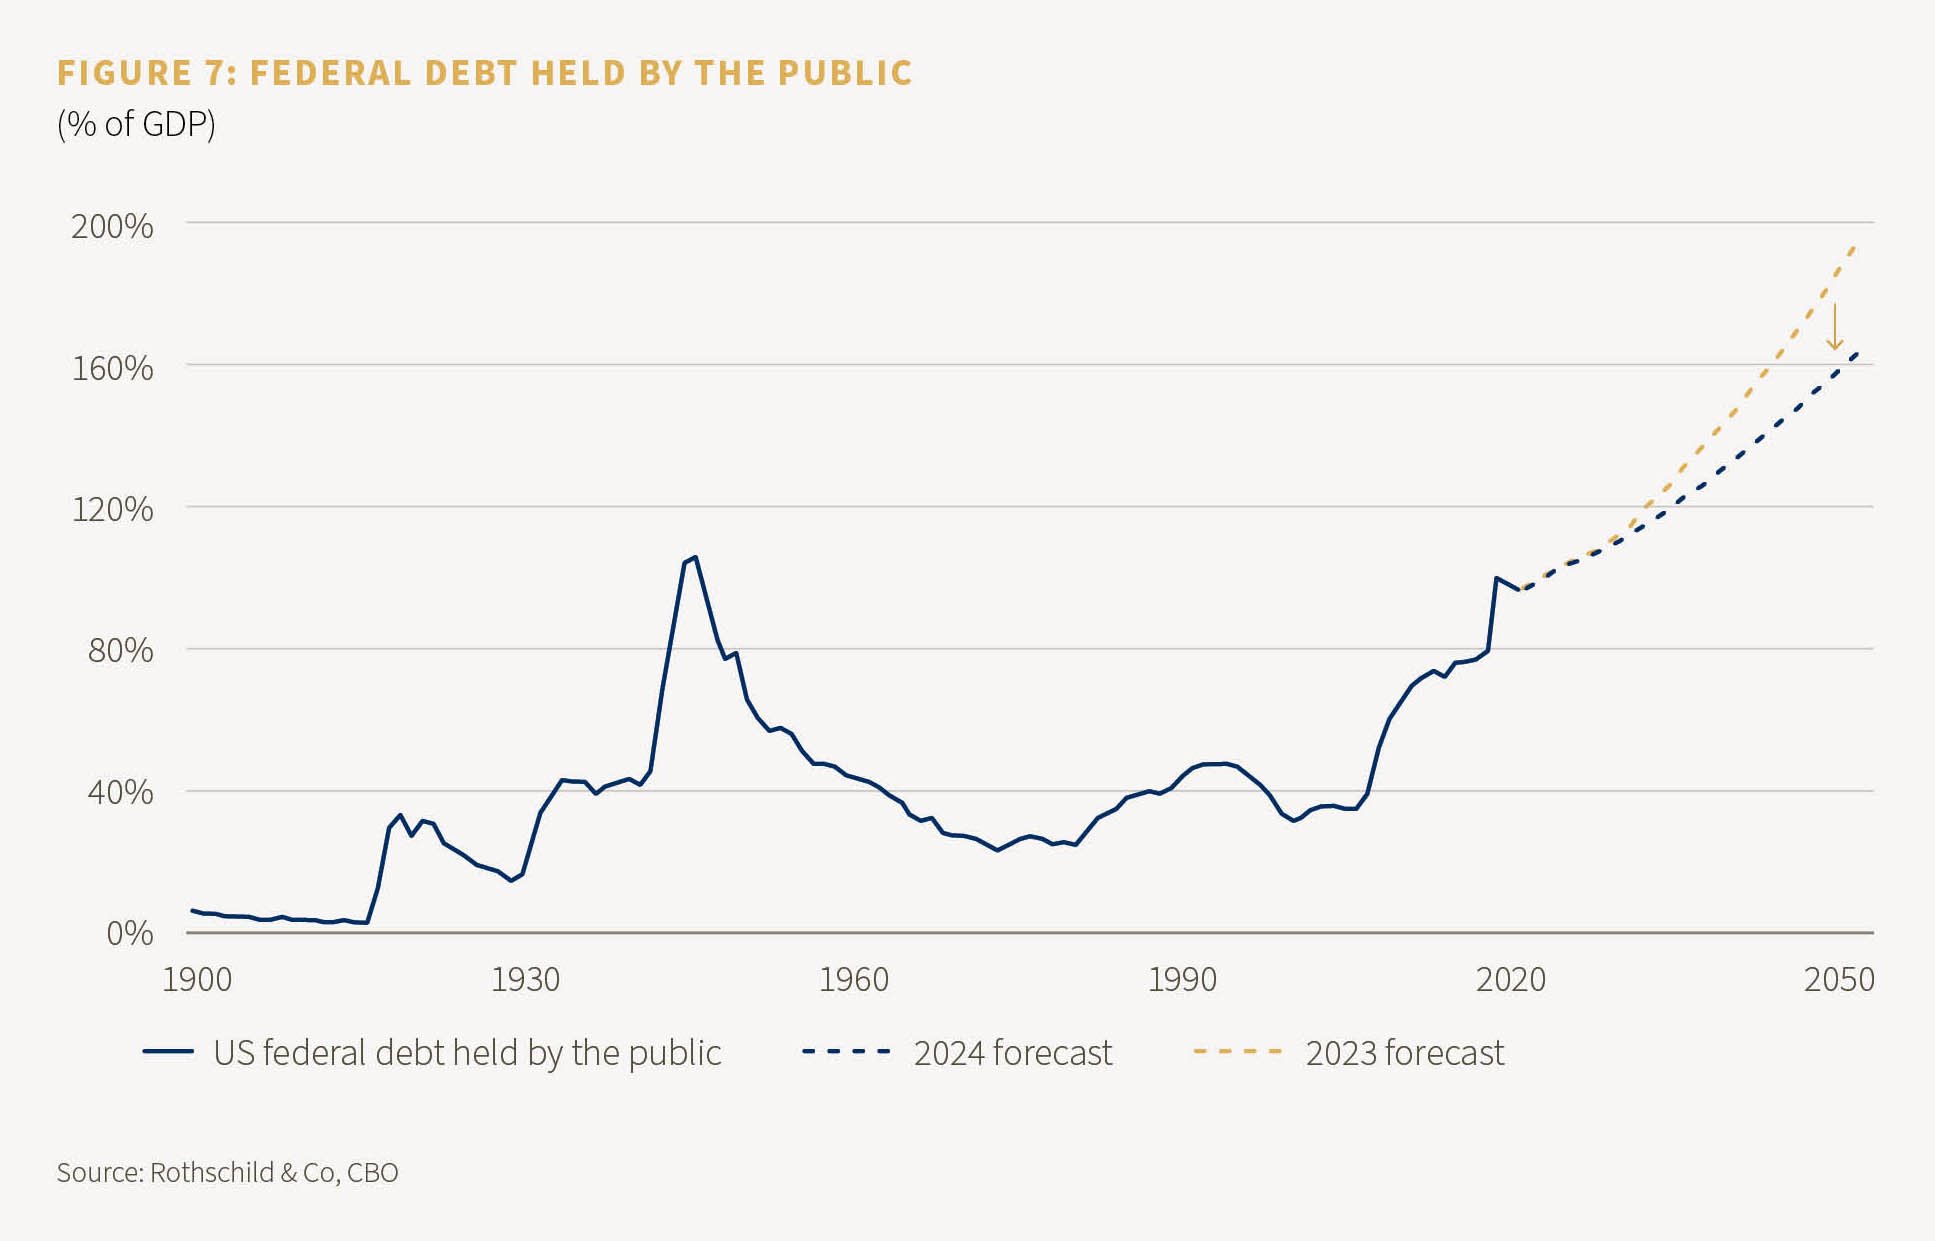 Figure 7 - Federal debt held by the public